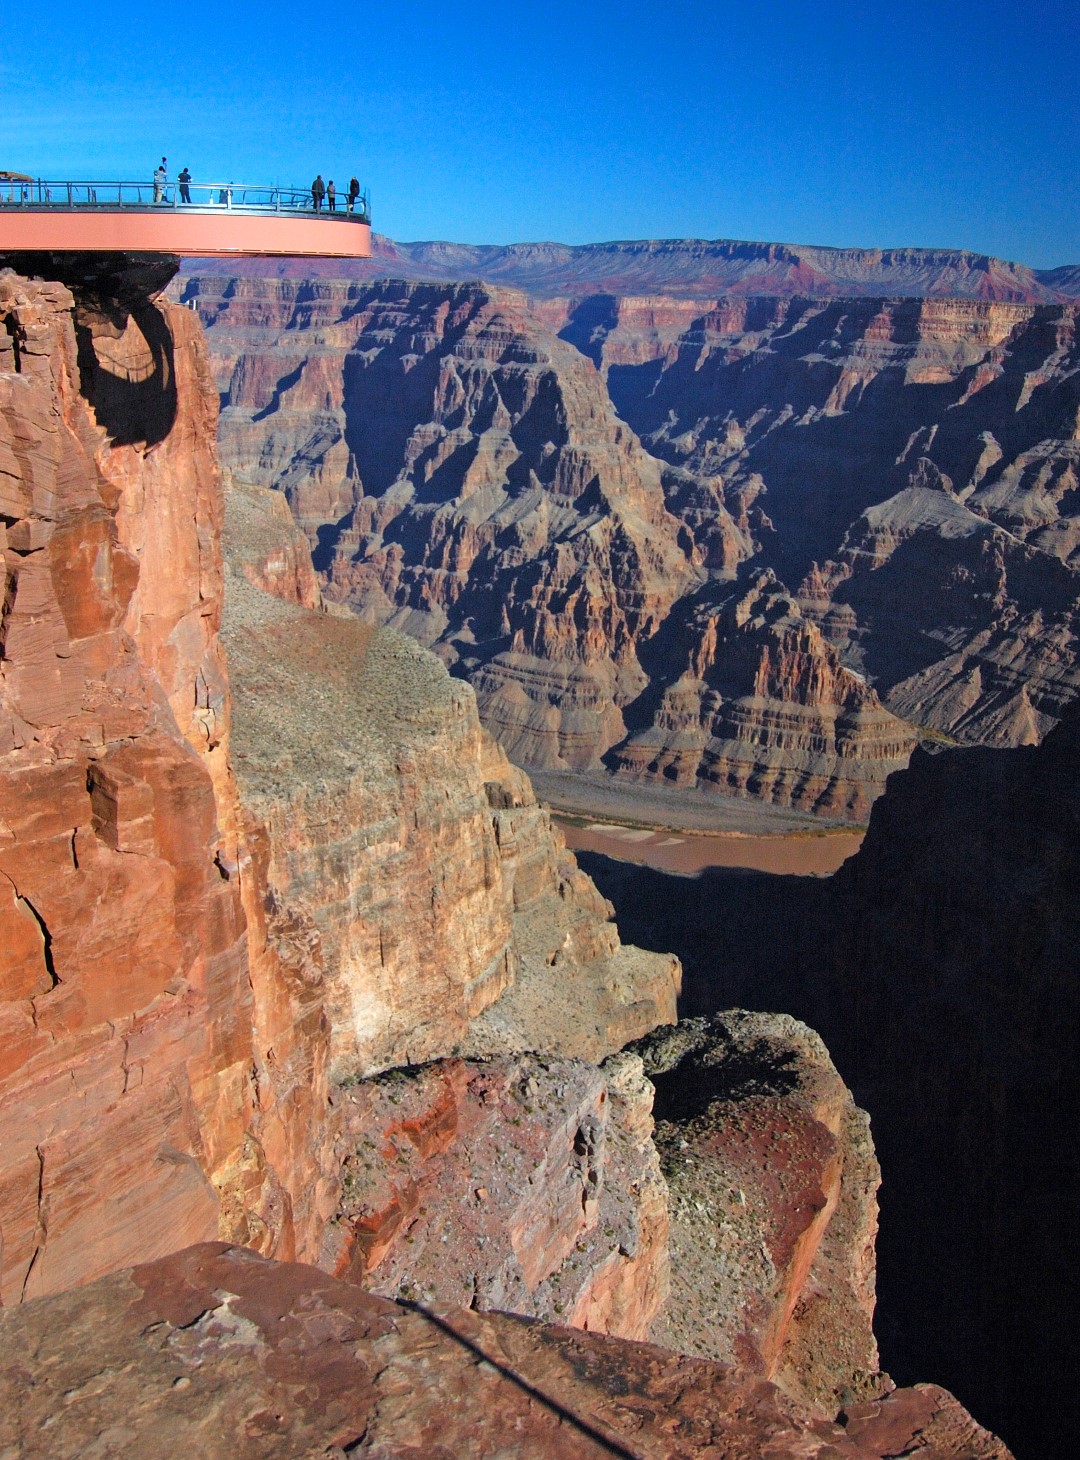 Stand on the Skywalk and gaze at the Grand Canyon’s many layers, which here reveal over half a billion years of geological time. The canyon itself was carved relatively recently—about 5 million years ago—by yearly spring flooding plus catastrophic floods that occurred when ancient lakes suddenly drained, after walls of soil or lava holding back the water gave way. Photo by Crista Worthy.